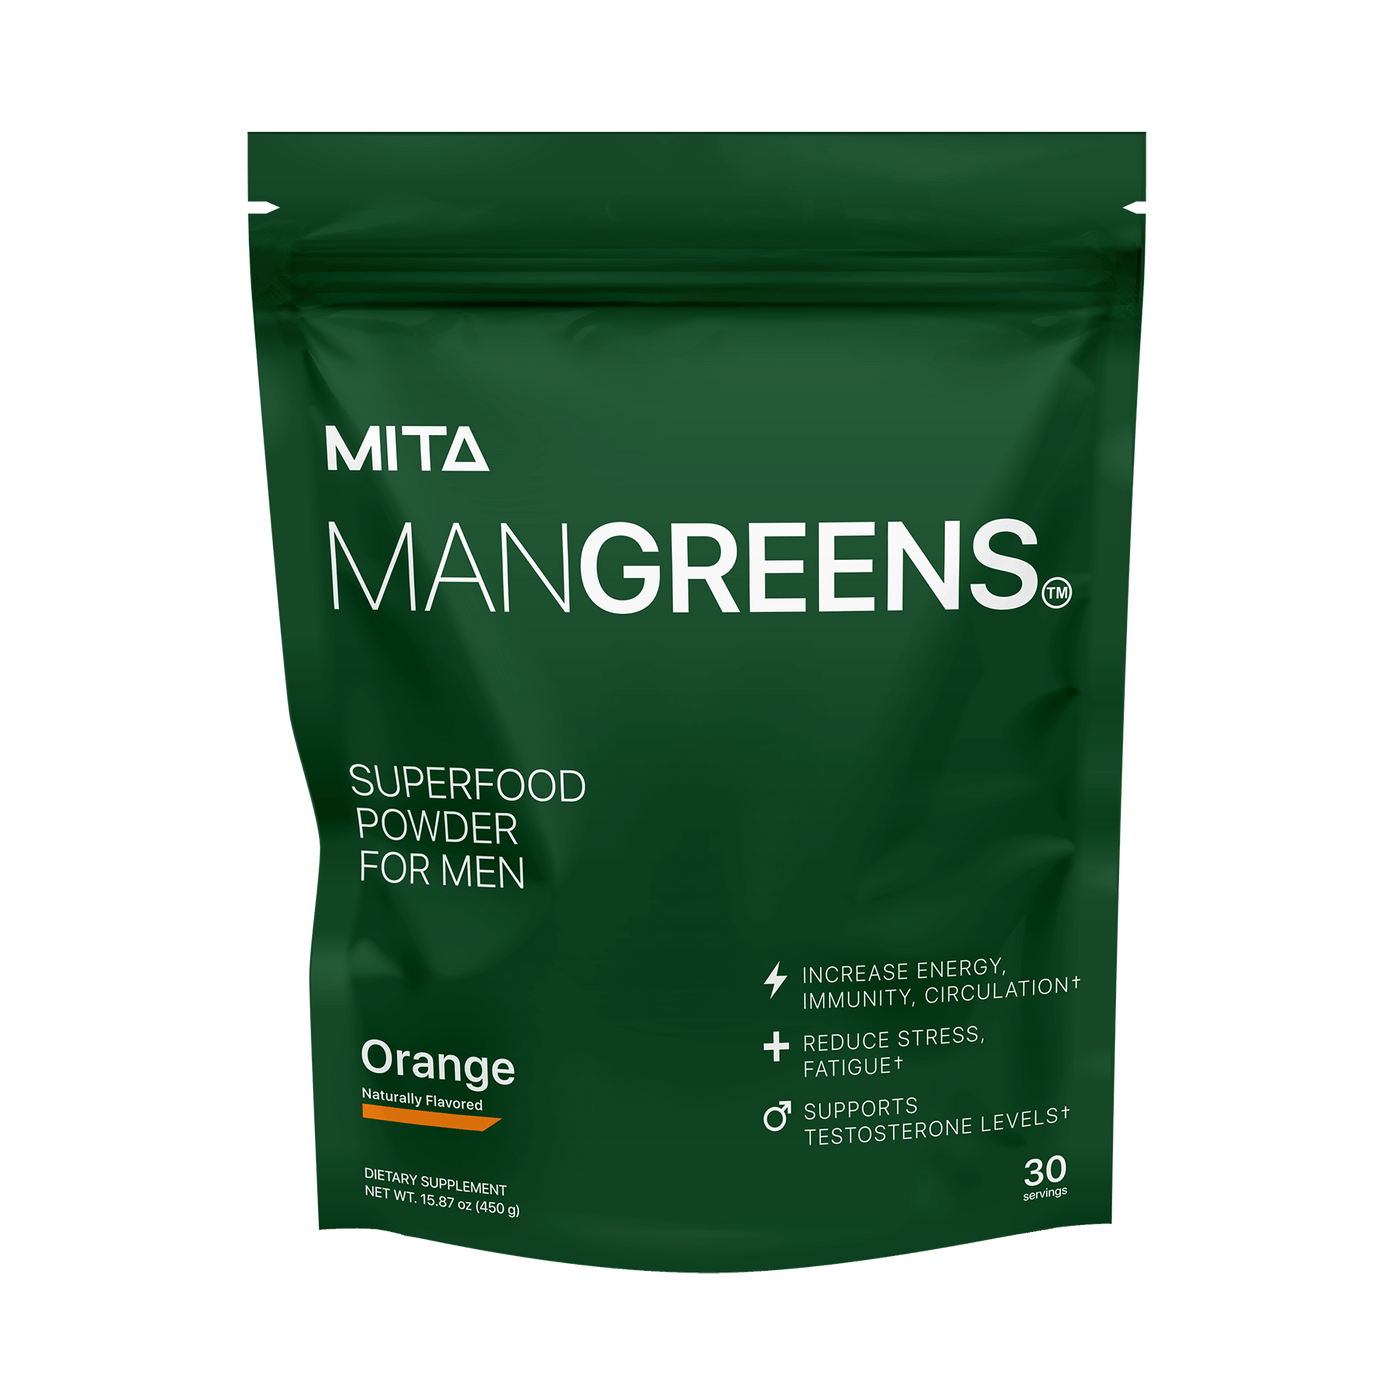 1 Bottle of Man Greens (One-Time Purchase)